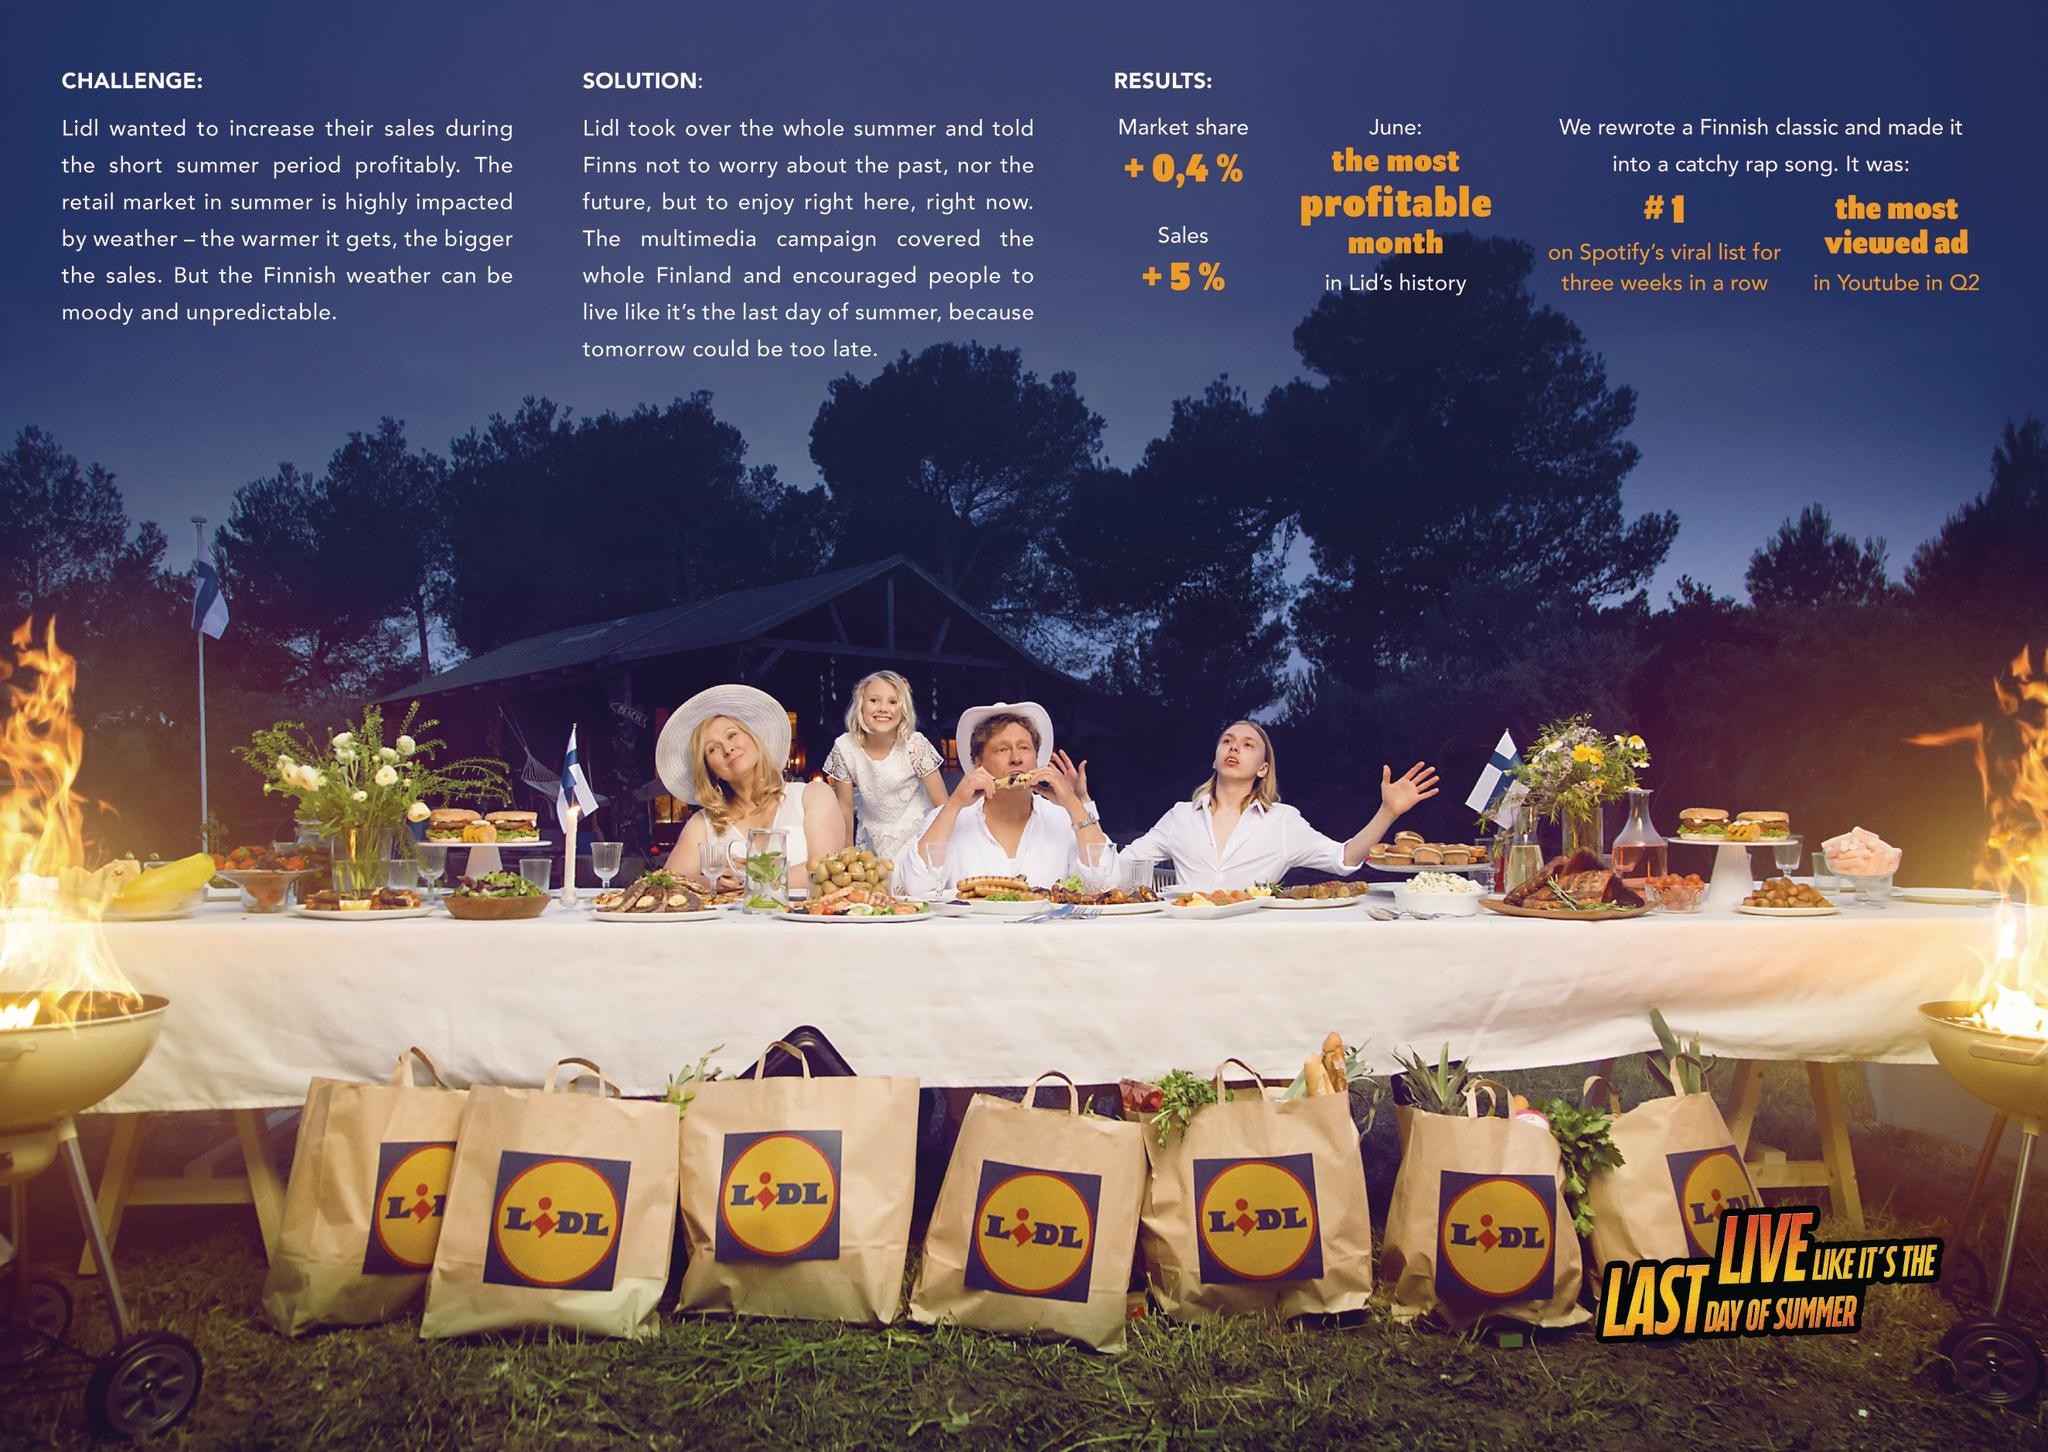 Lidl – Live like it's the last day of summer